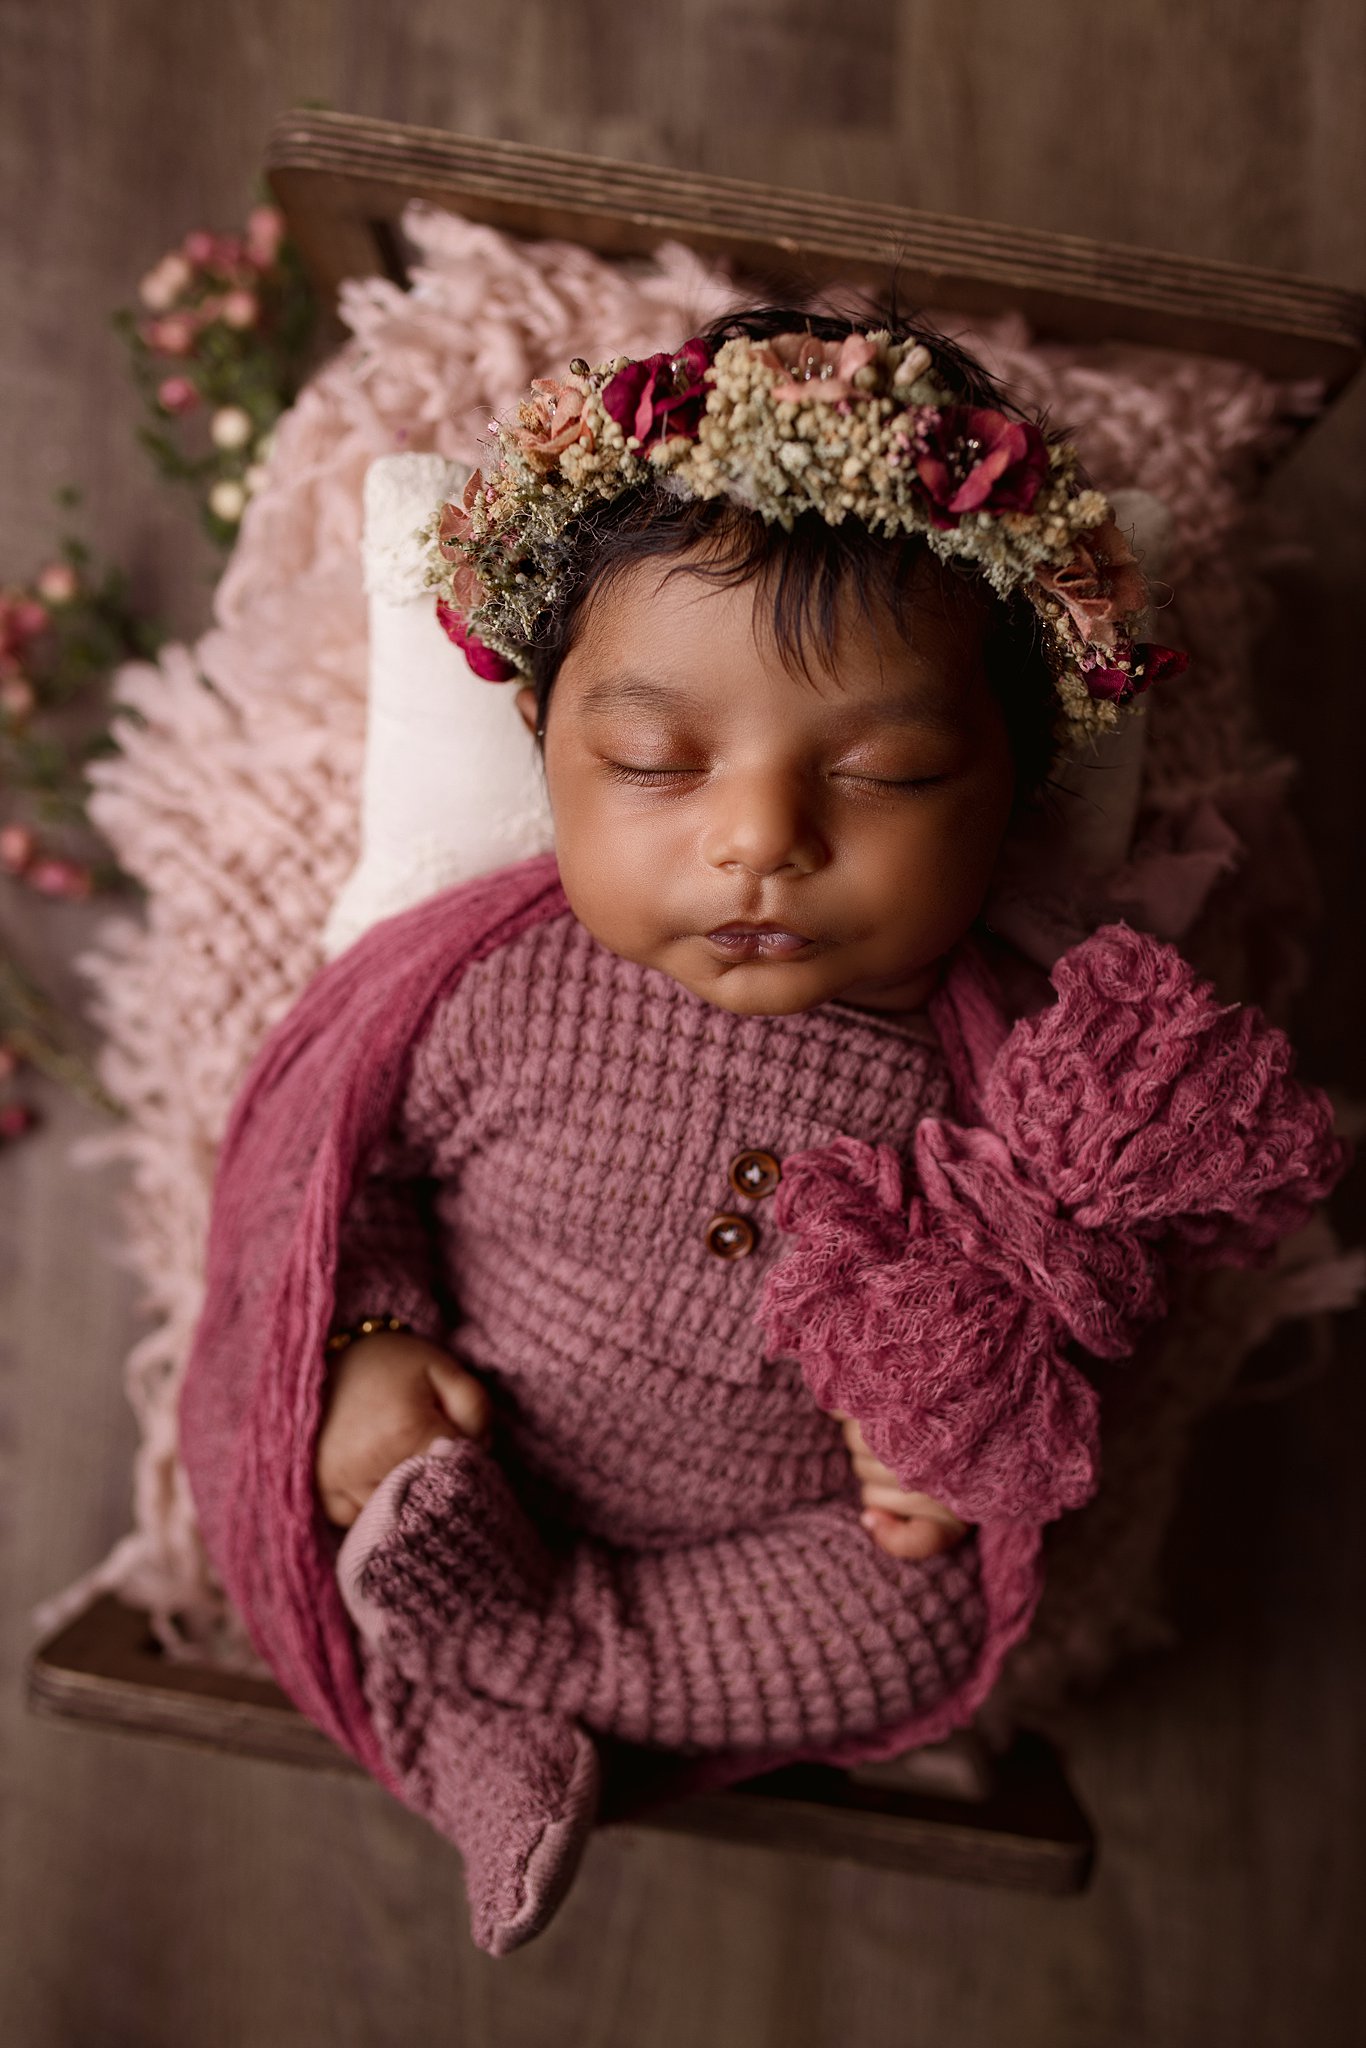 A newborn baby sleeping in a knit purple onesie in a tiny wooden bed with a flower headband Ava's Appletree